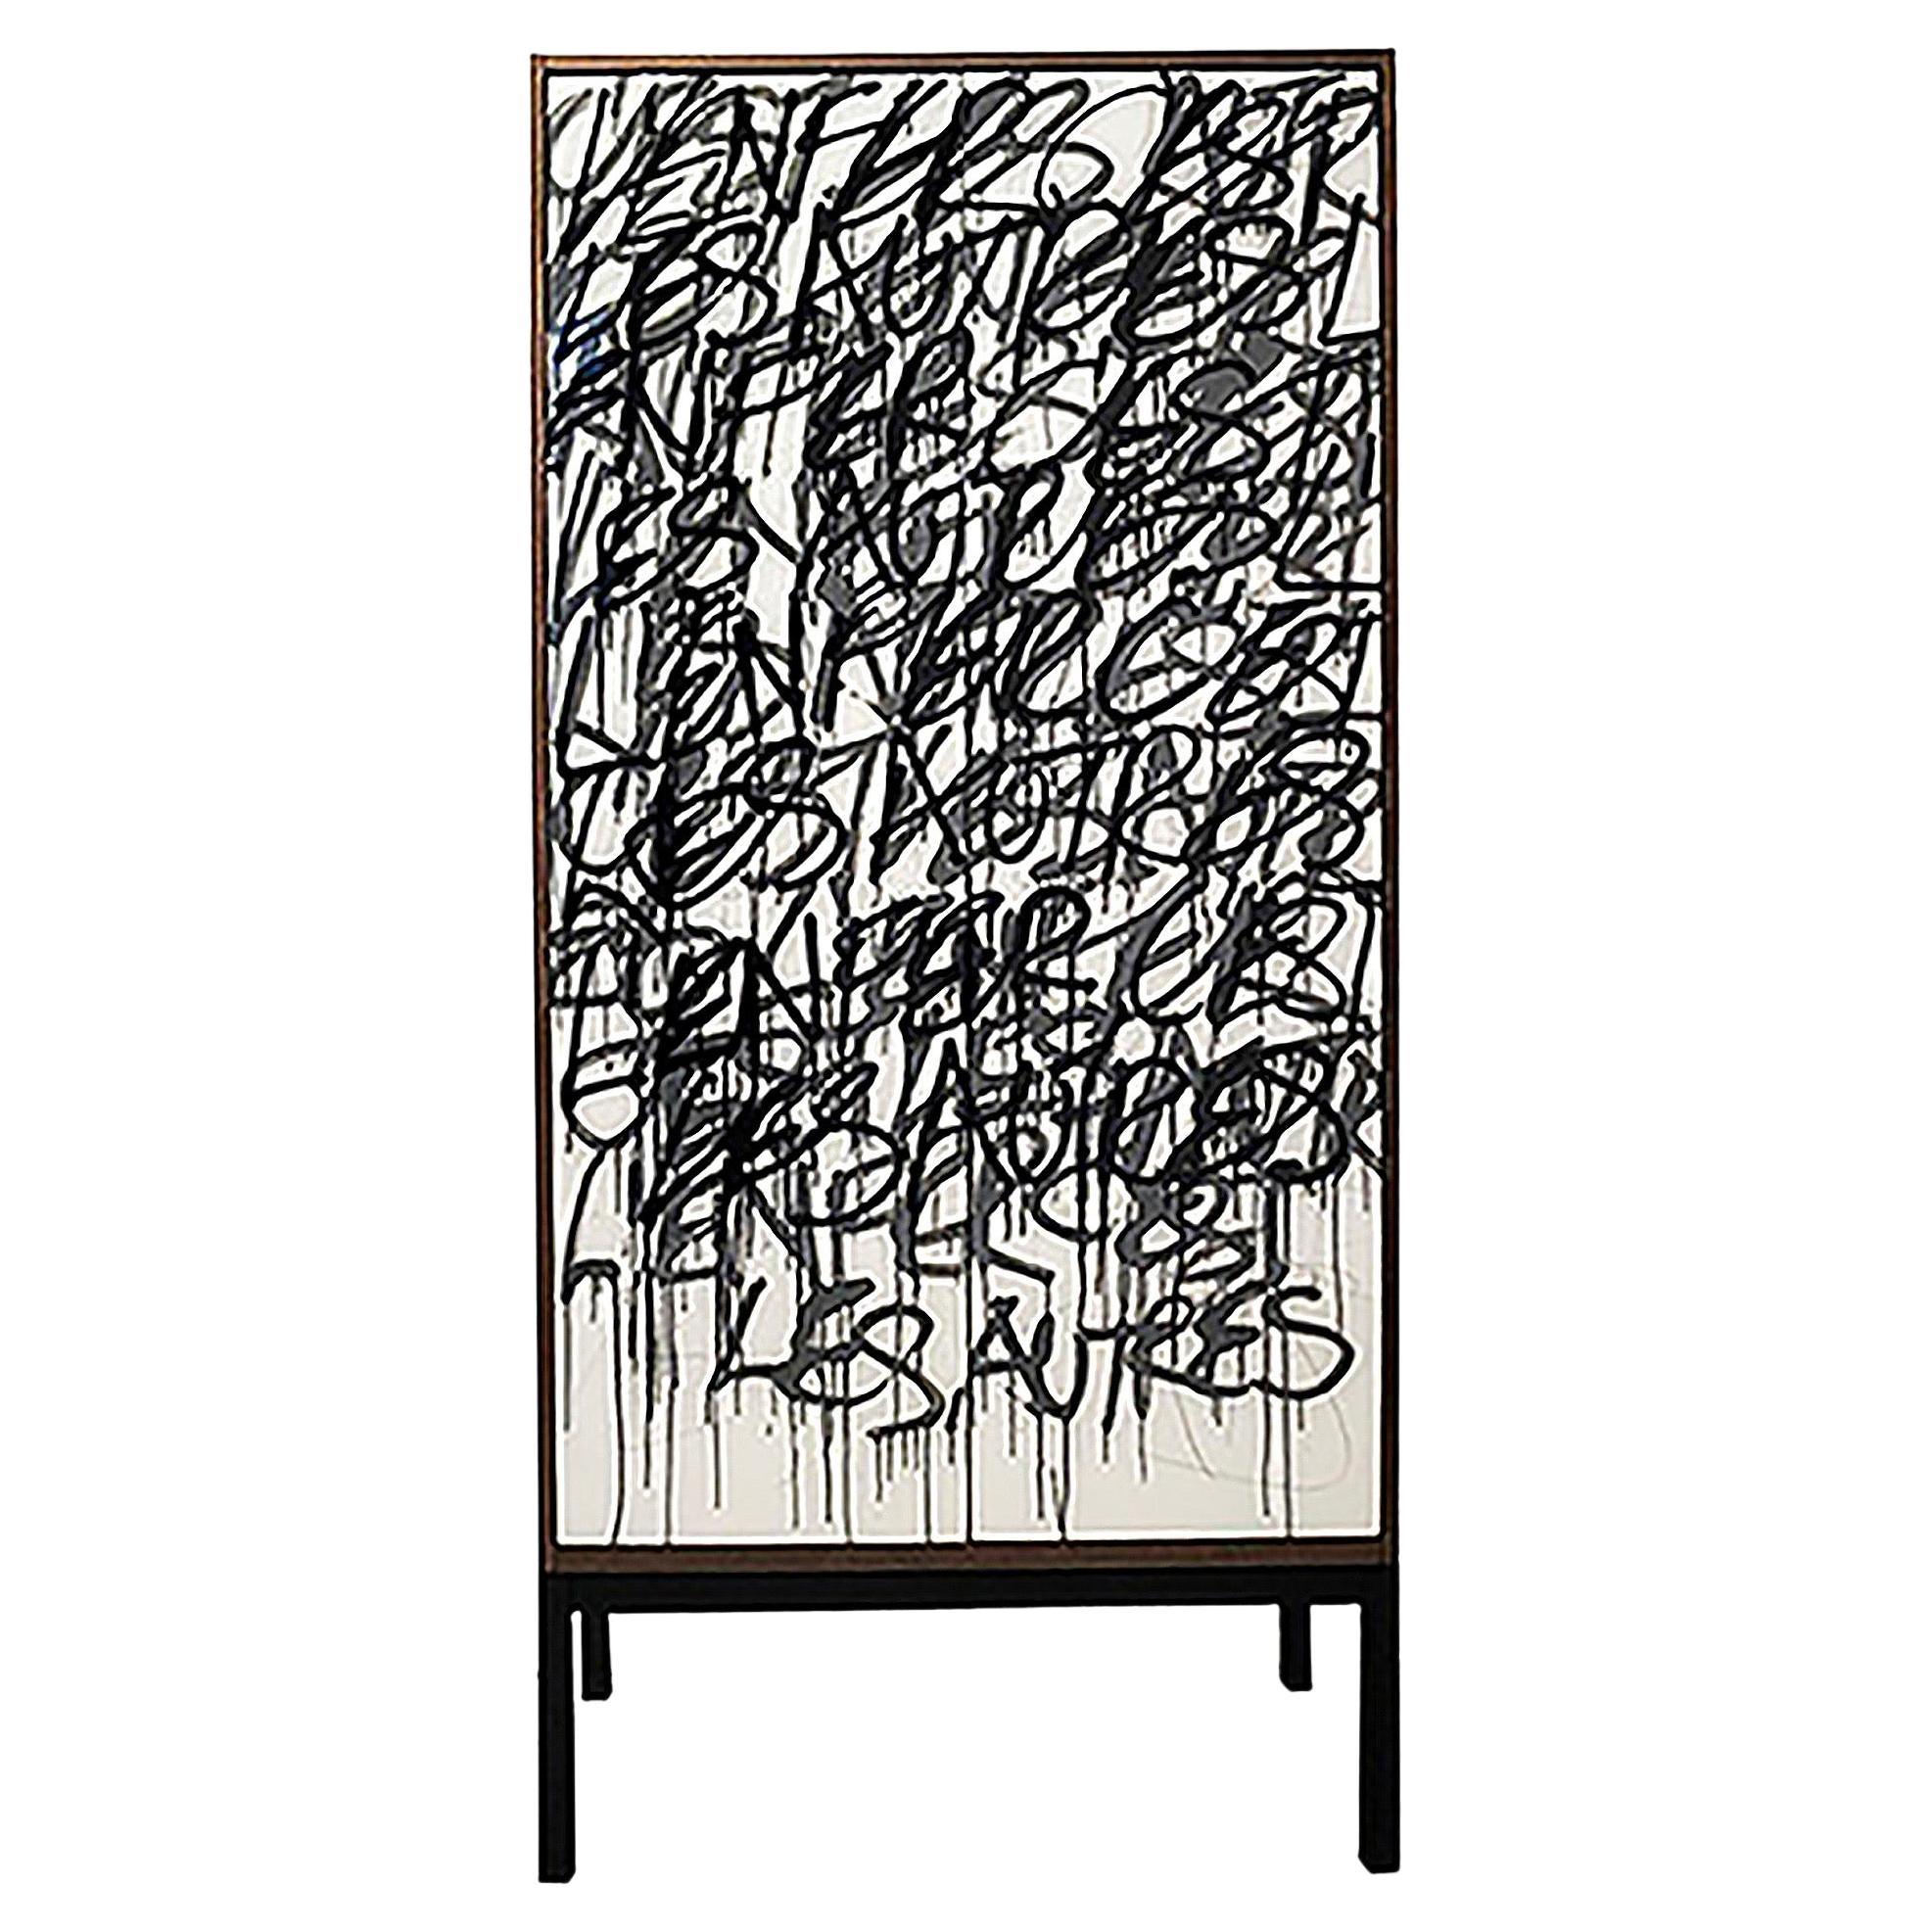 The M.C. Bar Cabinet is based on our Say It Again graffiti armoire.

The client can supply words that the artist will incorporate into the artwork on the doors, making the cabinet one of kind.

The exterior is walnut, the interior ebony stained. 